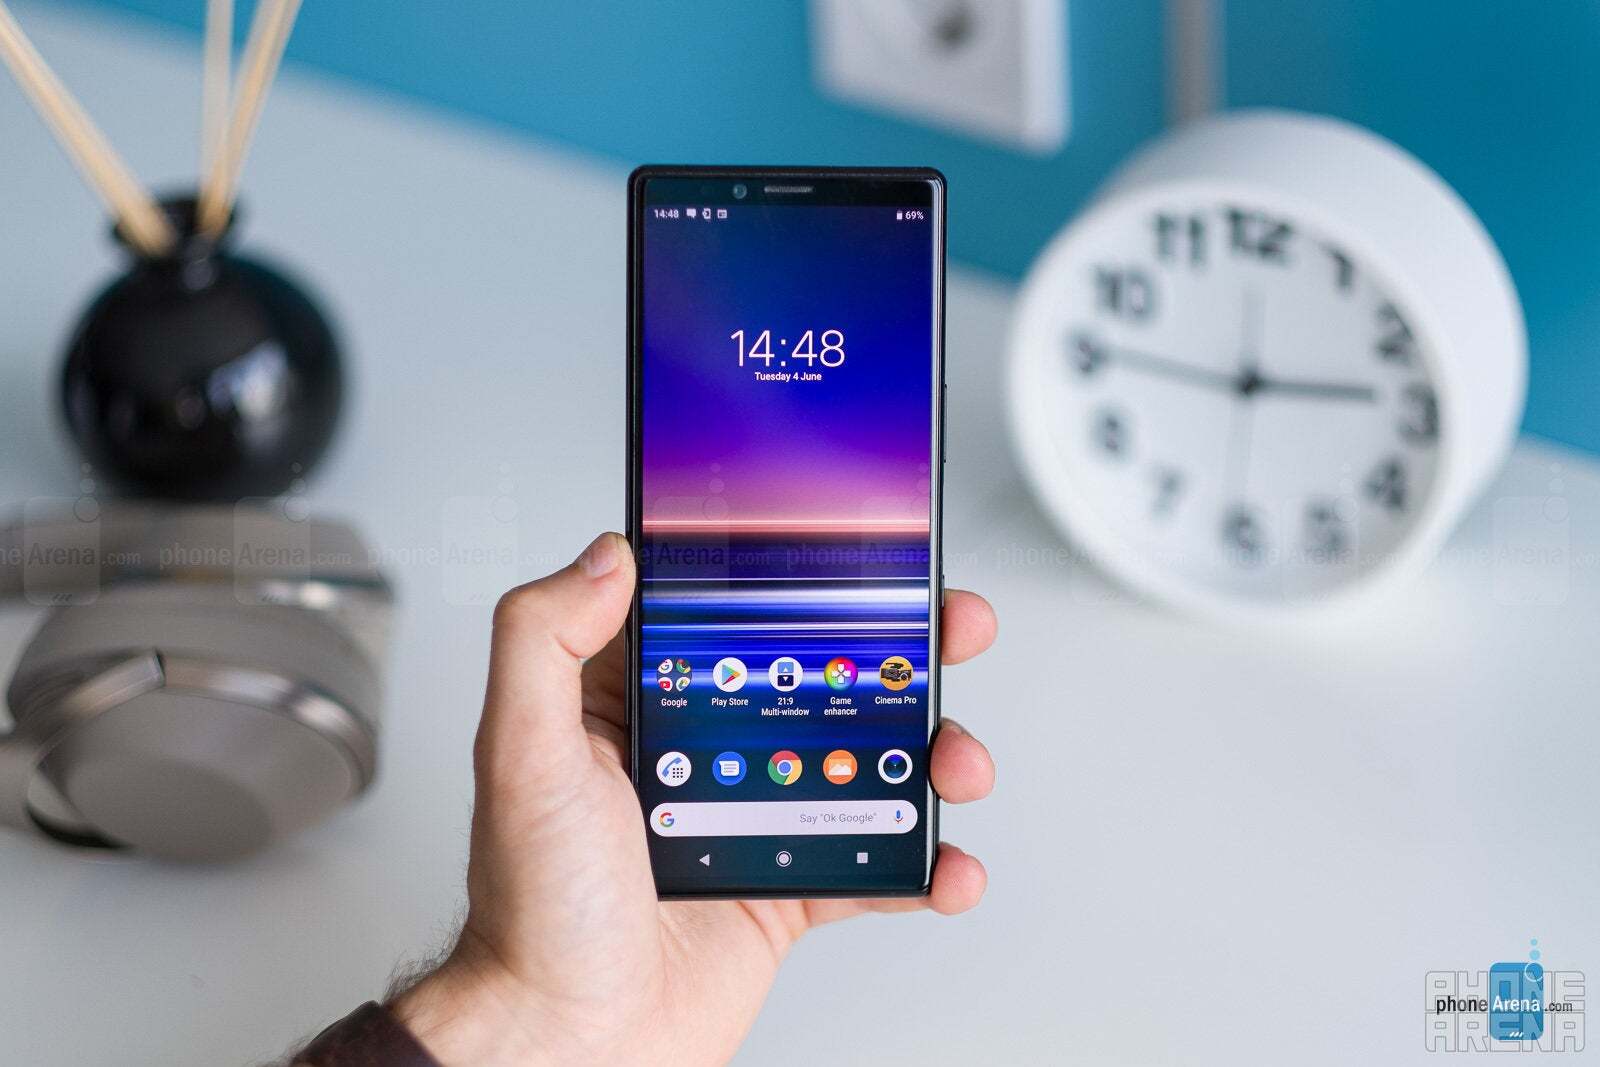 The weird 21 to 9 aspect ratio started in 2019 with the Xperia 1 - Sony's new Xperia phone might just be the biggest comeback in the smartphone market